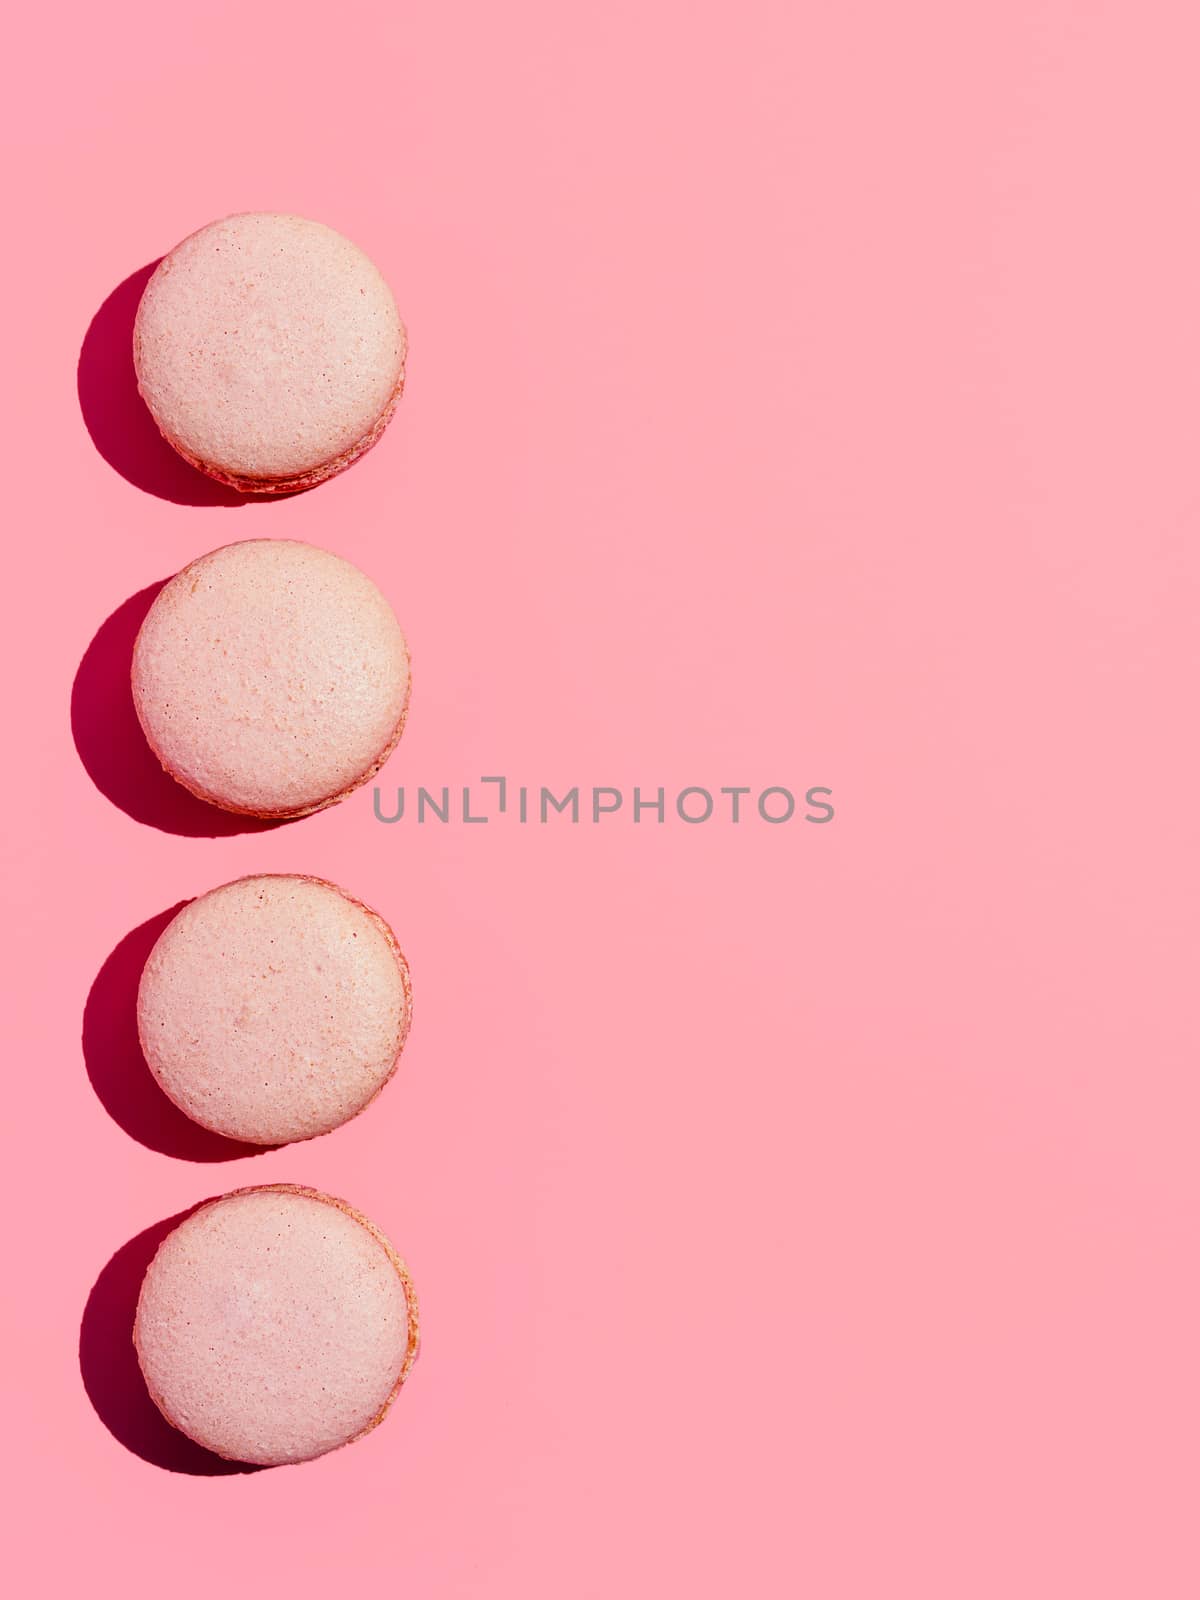 Pink macarons with copy space. Row of perfect french macarons or macaroons on pink background. Top view or flat lay. Hard light